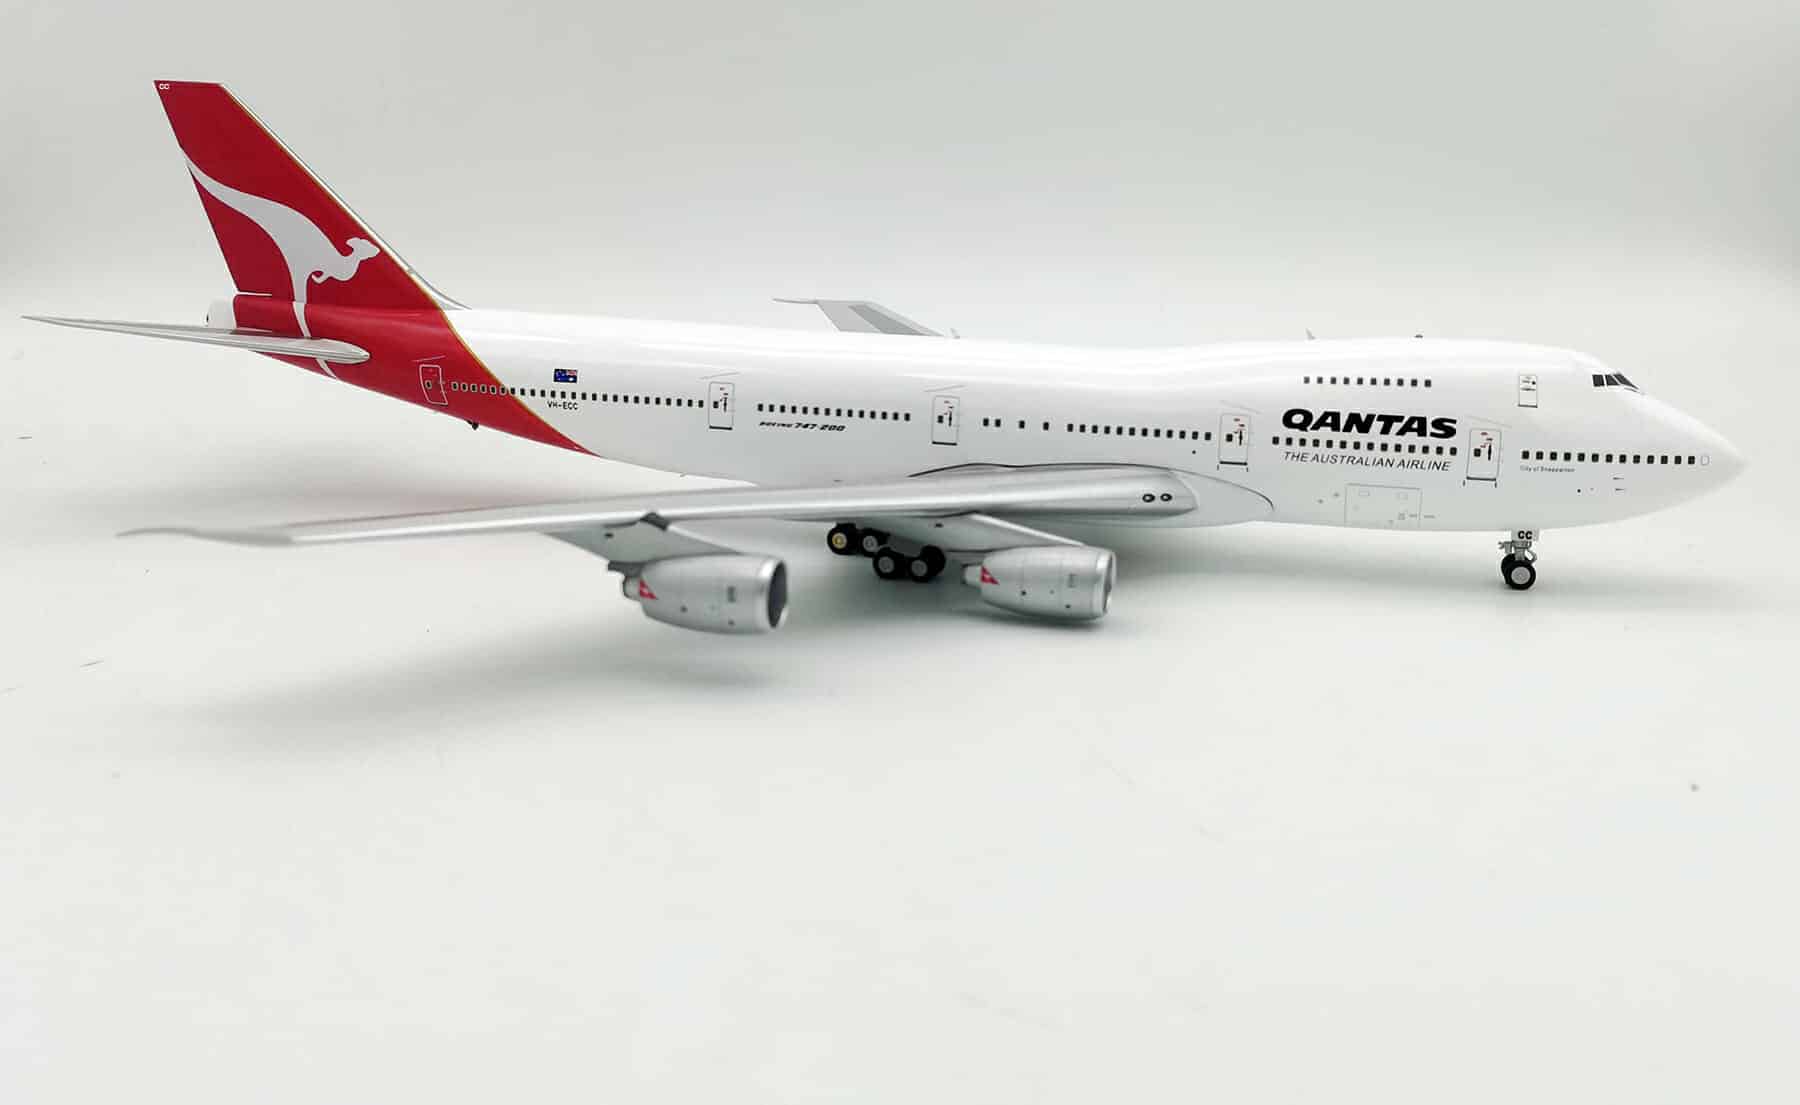 inflight - 1:200 qantas boeing 747-200 (vh-ecc) with stand